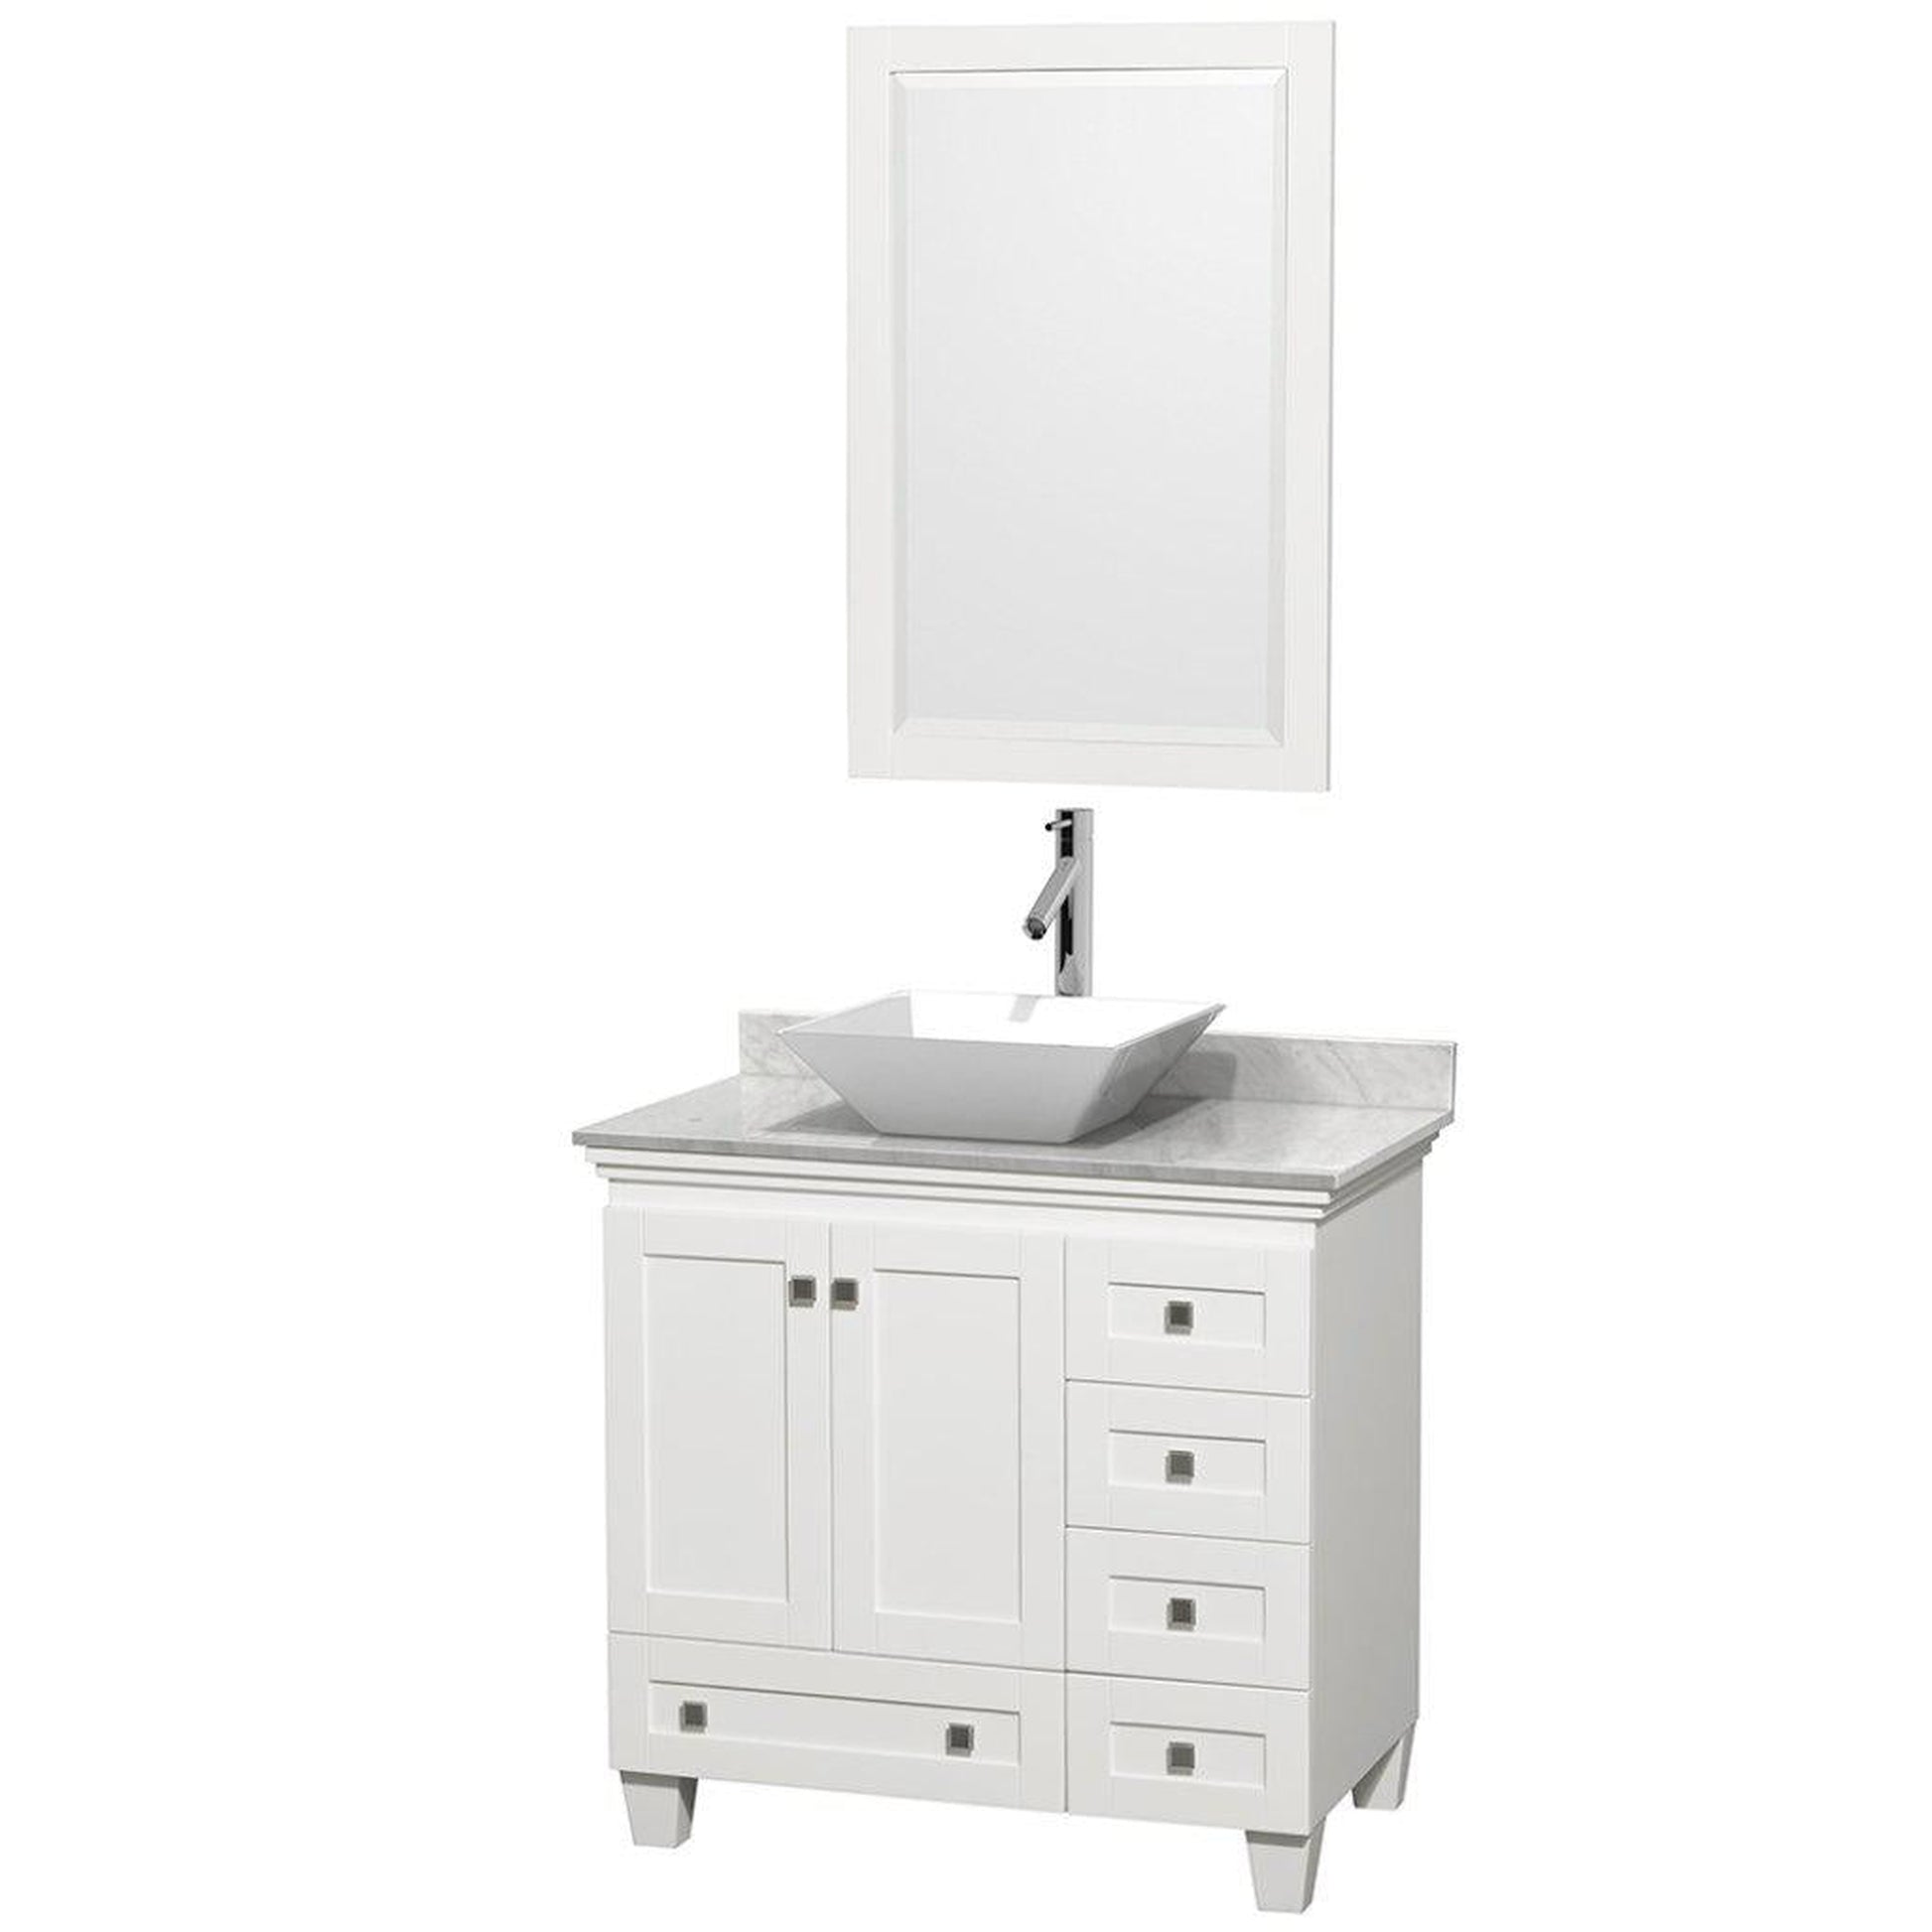 Wyndham Collection Acclaim 36" Single Bathroom White Vanity Set With White Carrara Marble Countertop, Pyra White Porcelain Sink, and 24" Mirror